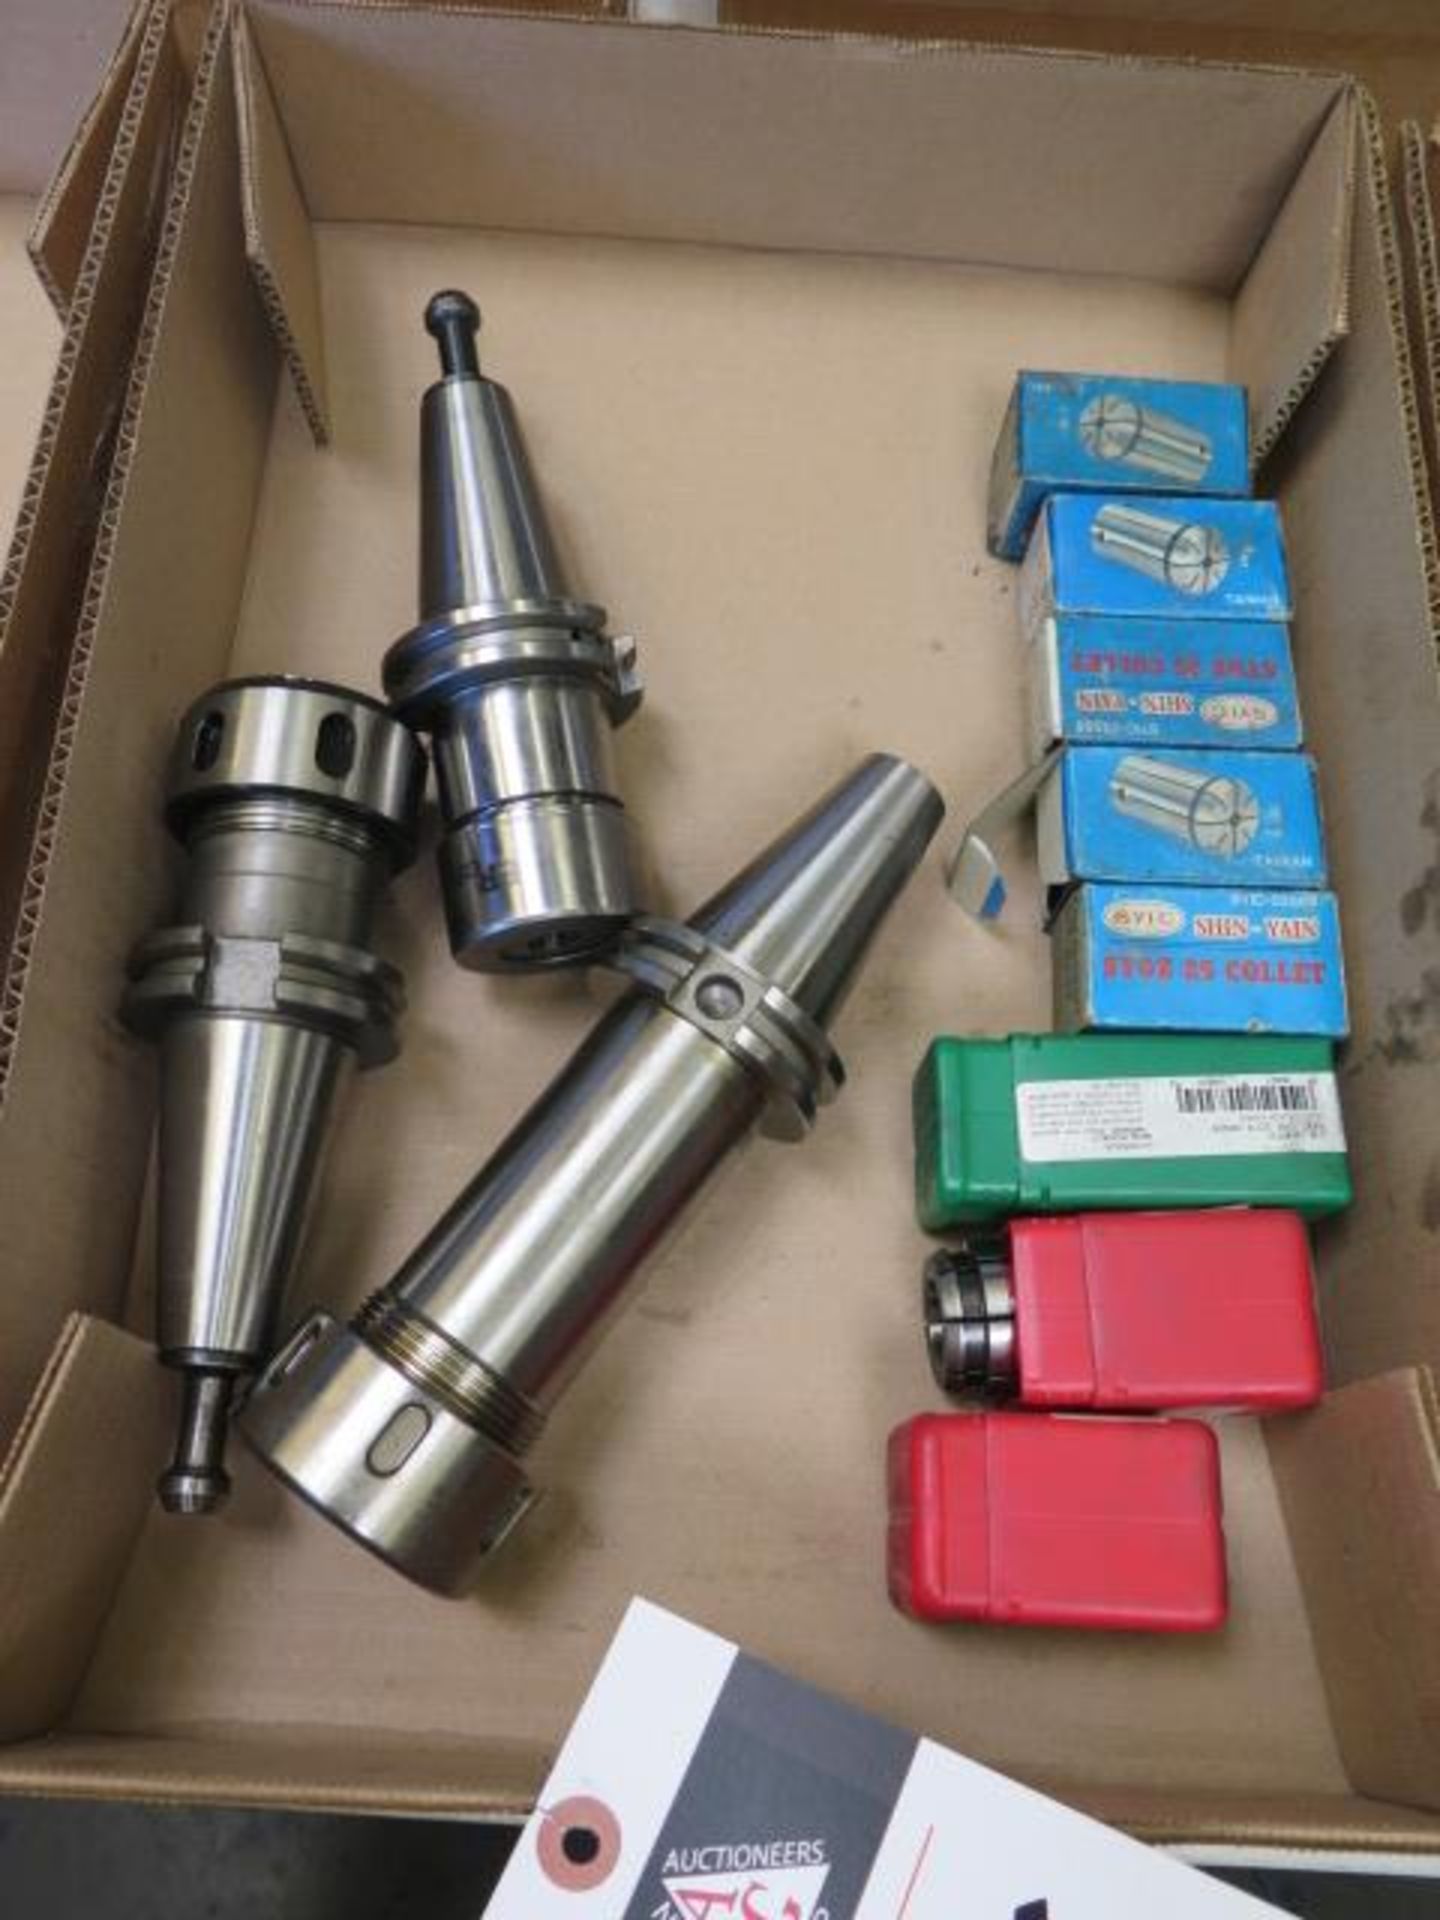 CAT-40 Taper Balanced TG100 Collet Chucks (3) w/ TG100 Flex Collets (8) (SOLD AS-IS - NO WARRANTY) - Image 2 of 5